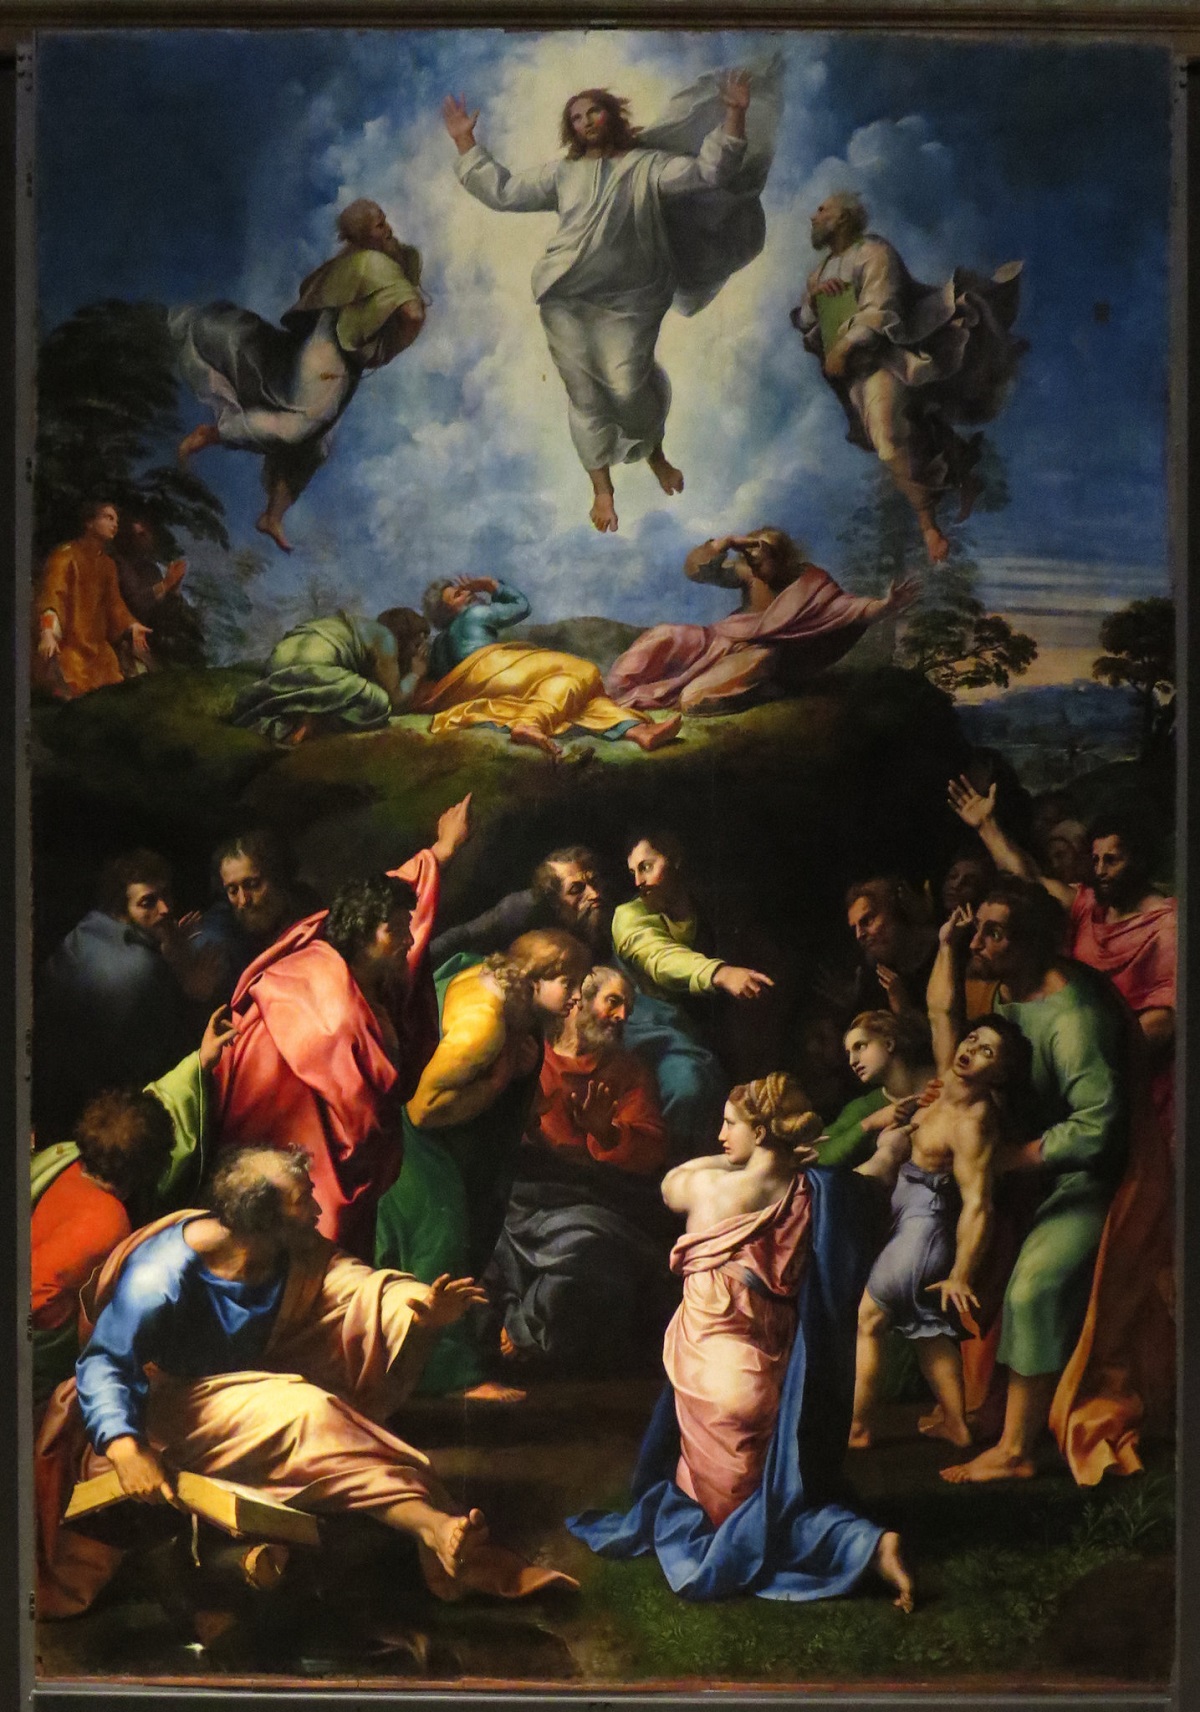 Transfiguration was Raphael’s last painting before his death at age 37. 